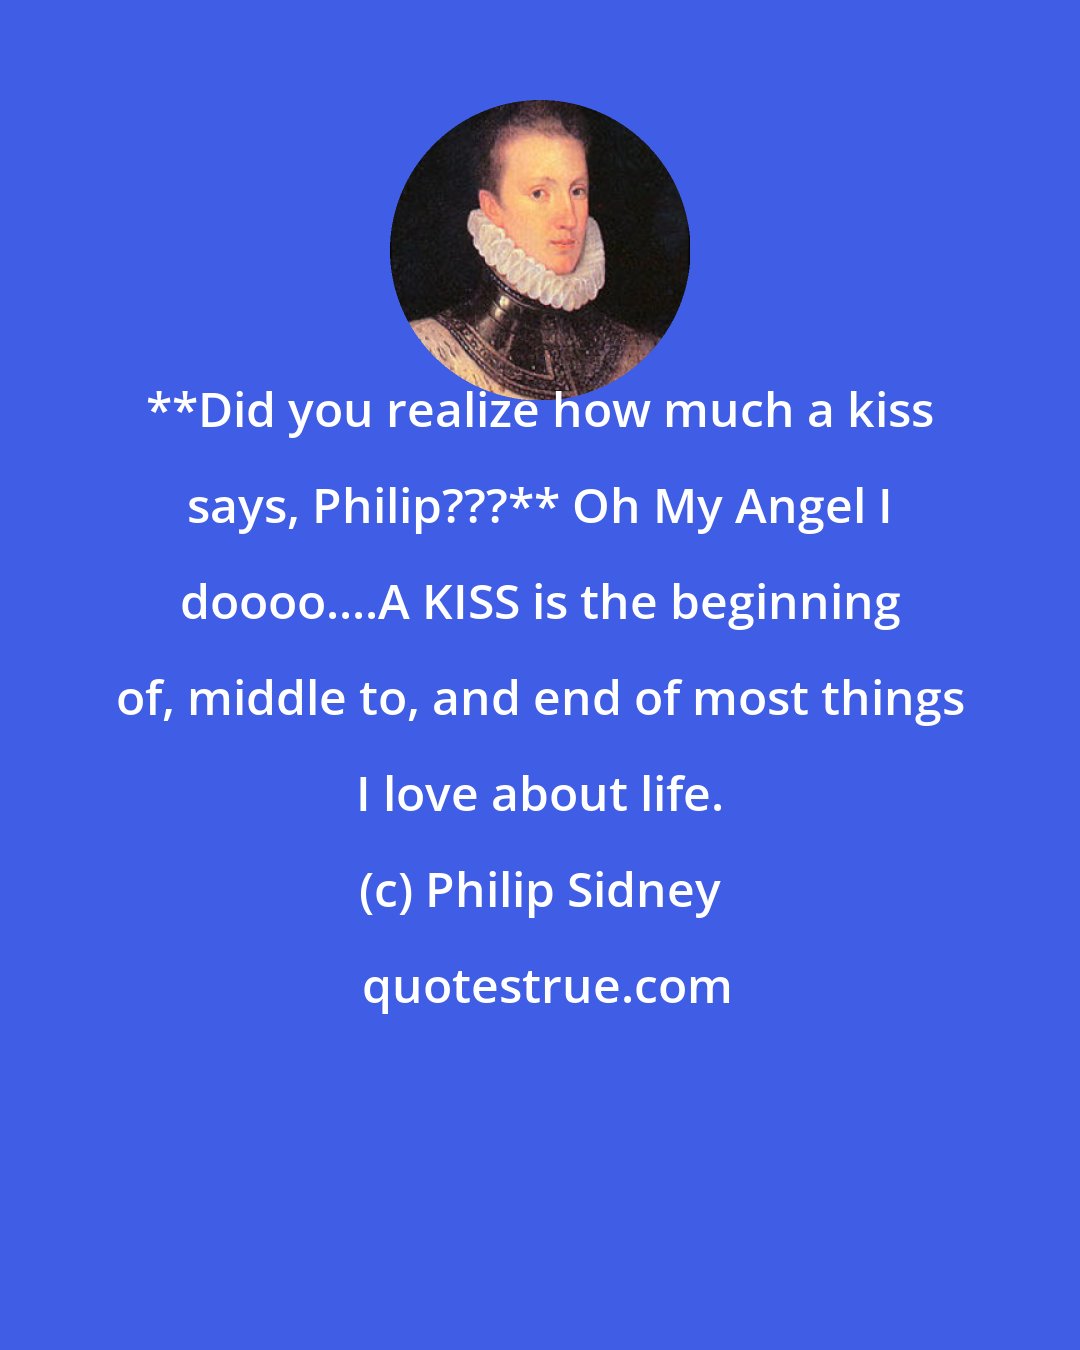 Philip Sidney: **Did you realize how much a kiss says, Philip???** Oh My Angel I doooo....A KISS is the beginning of, middle to, and end of most things I love about life.